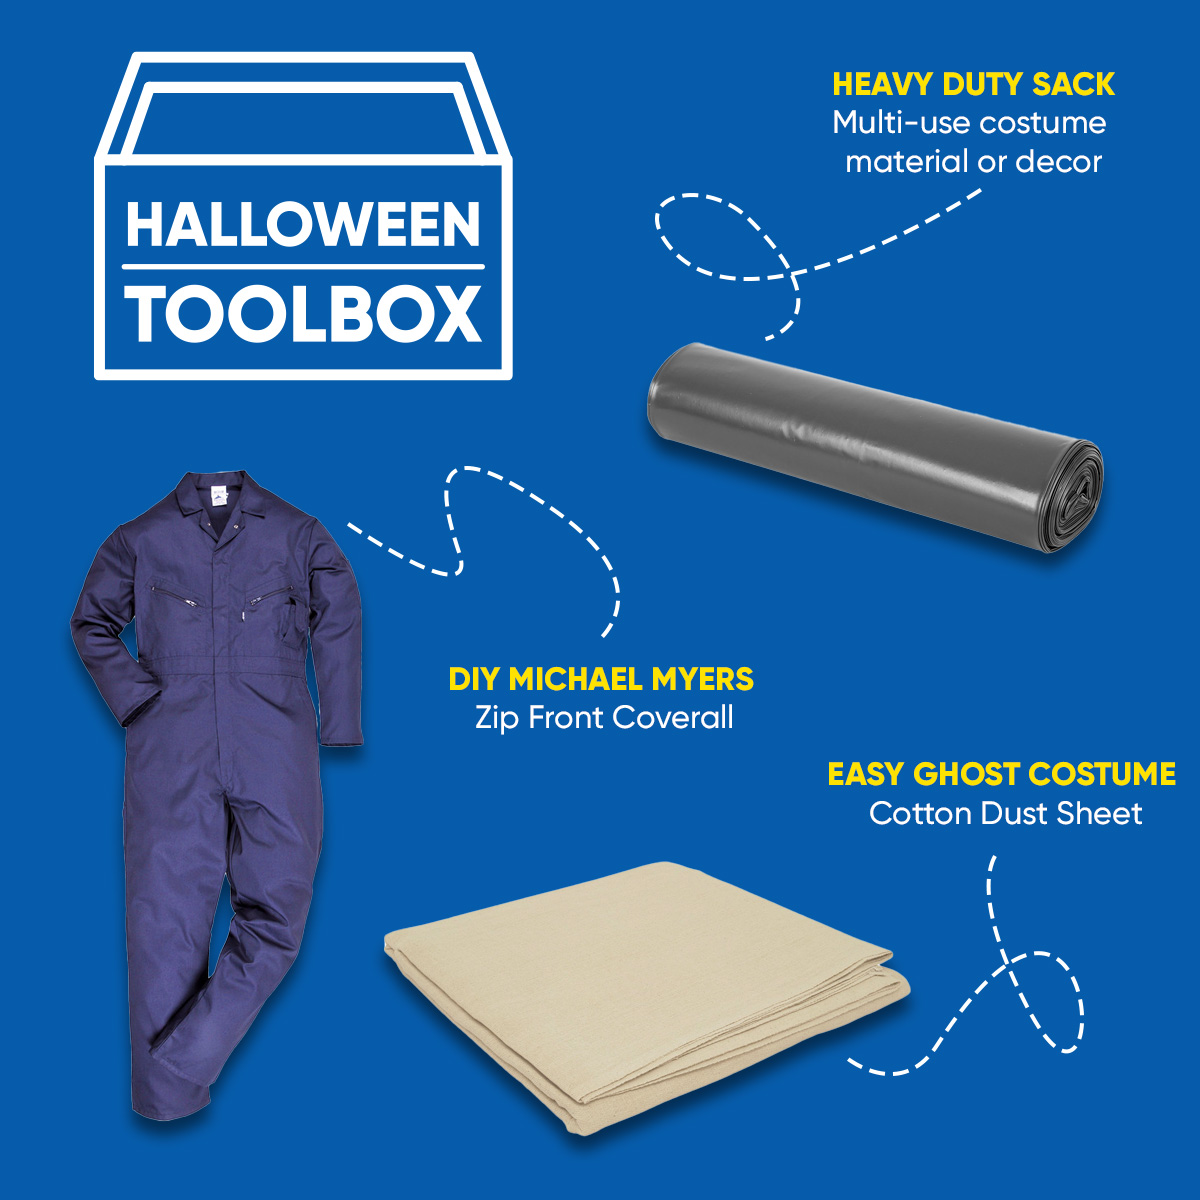 In case you're in a bind with your costume, we've reached into our Halloween toolbox to see how we can help 🎃 Are there any we're missing? 🤔